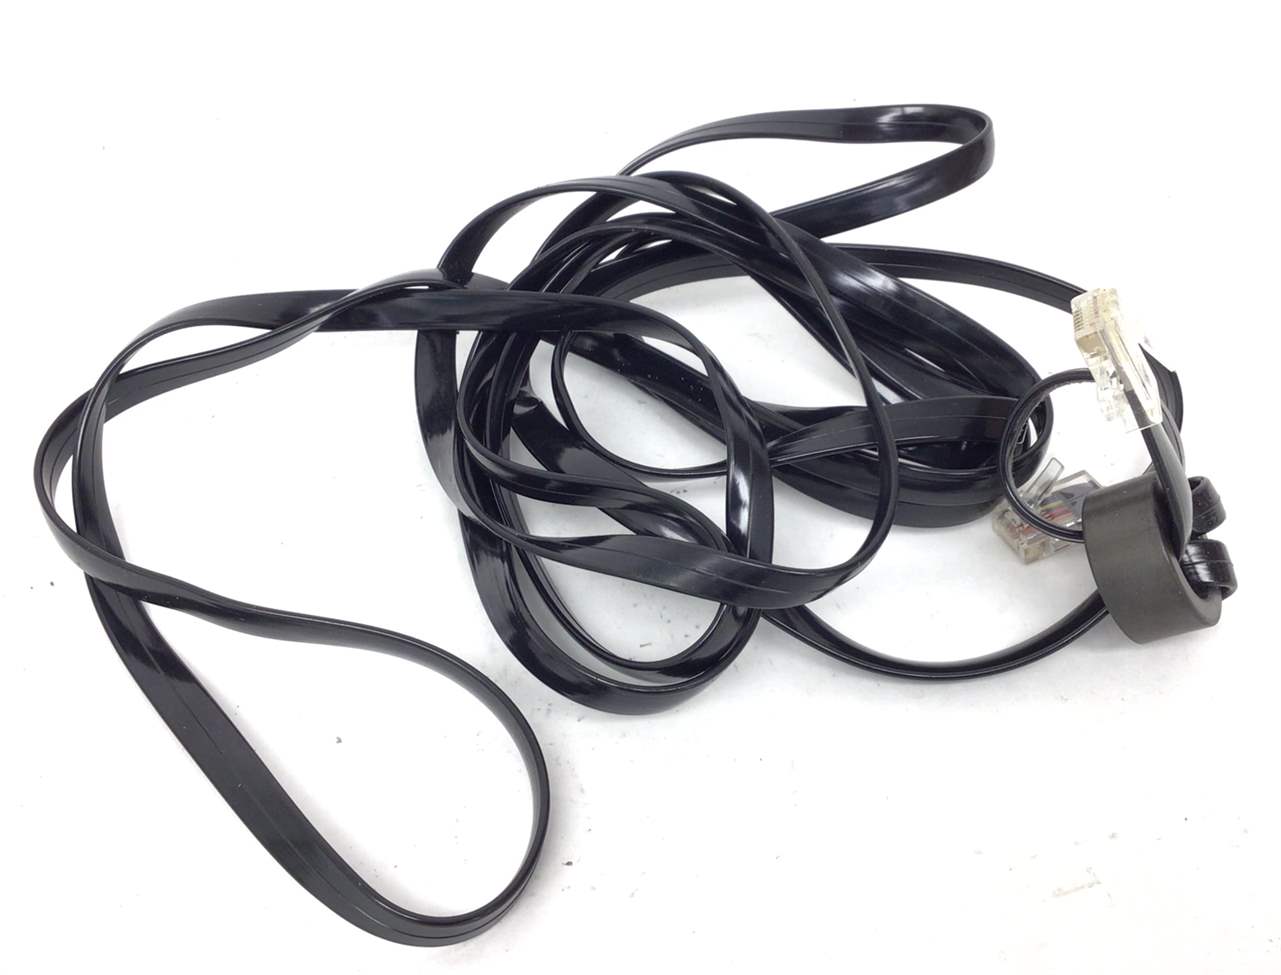 Main Data Cable Wire Harness Interconnect with Filter (Used)